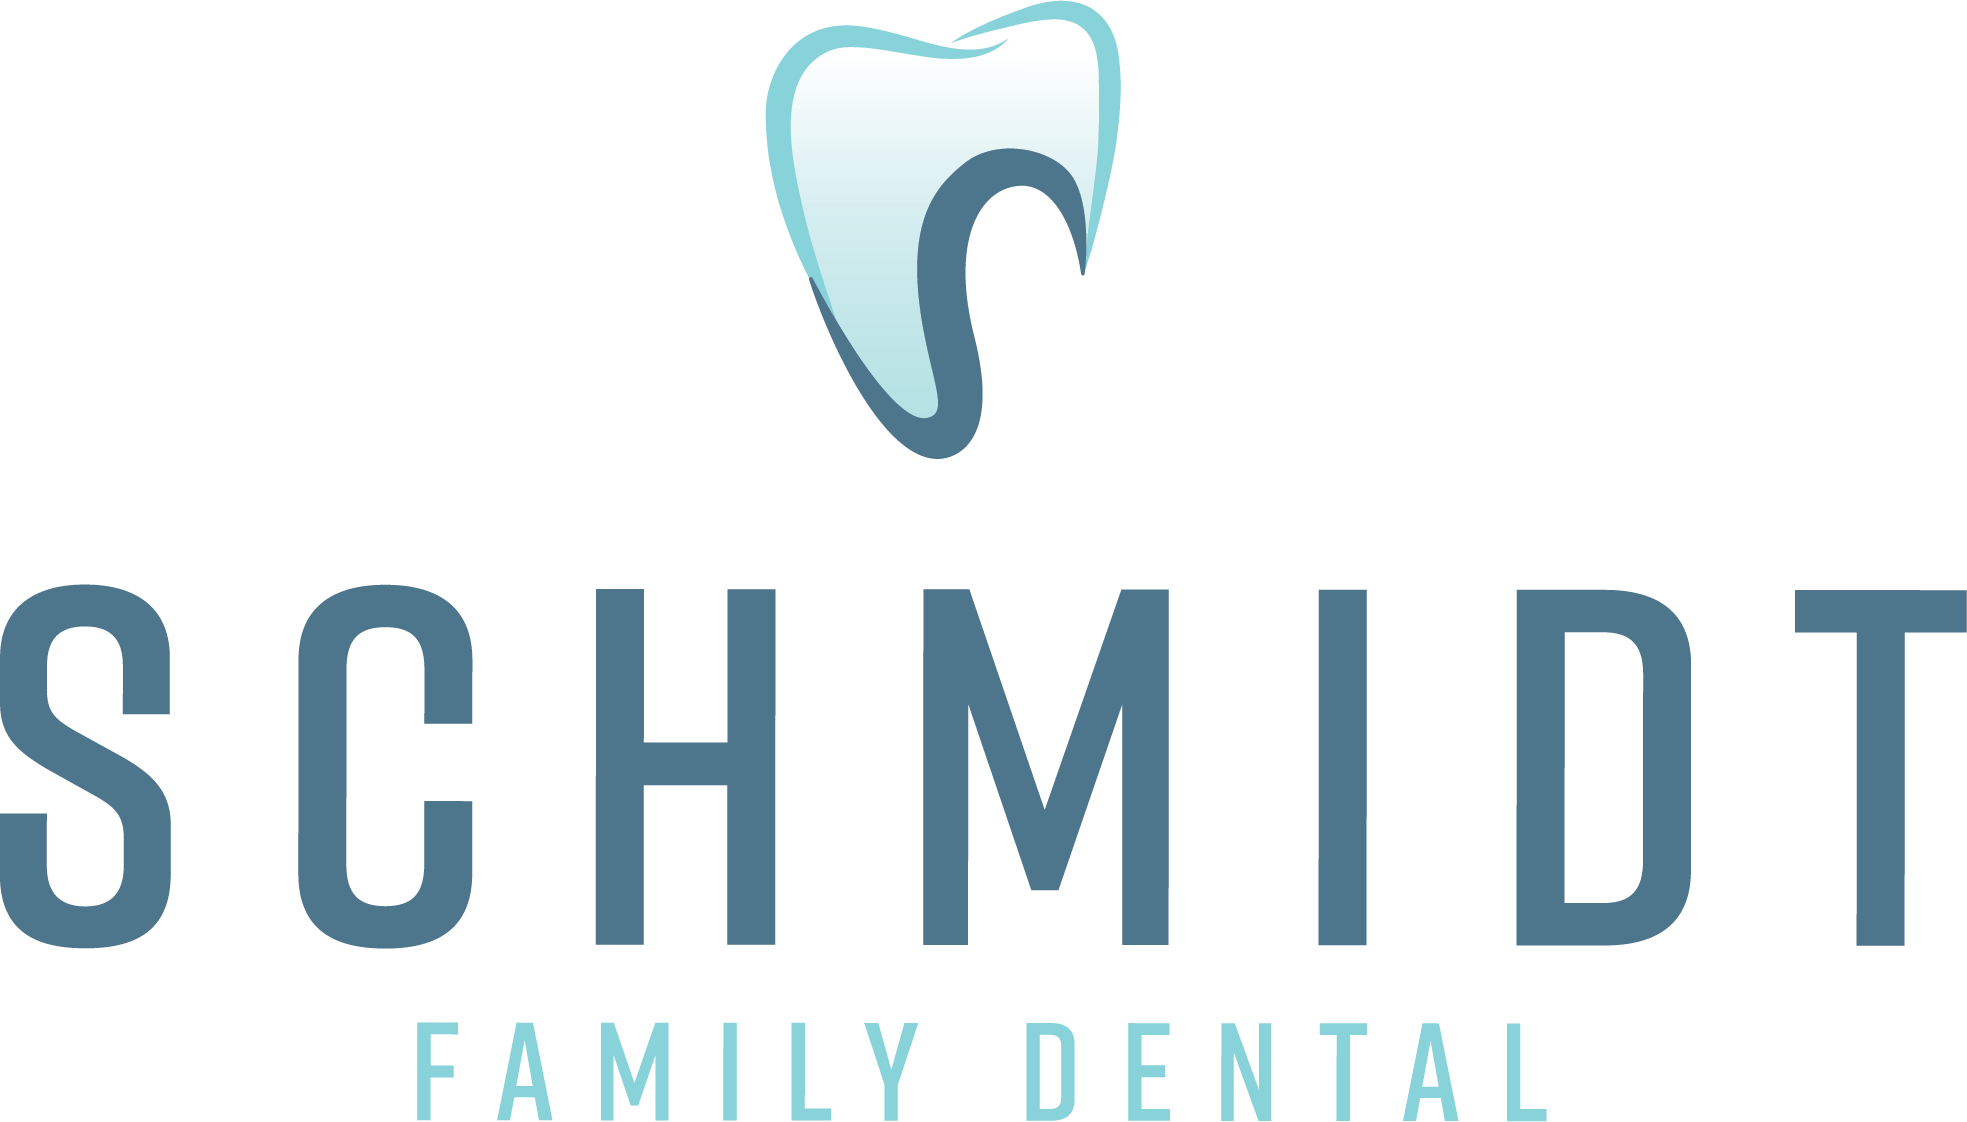 Link to Schmidt Family Dental home page